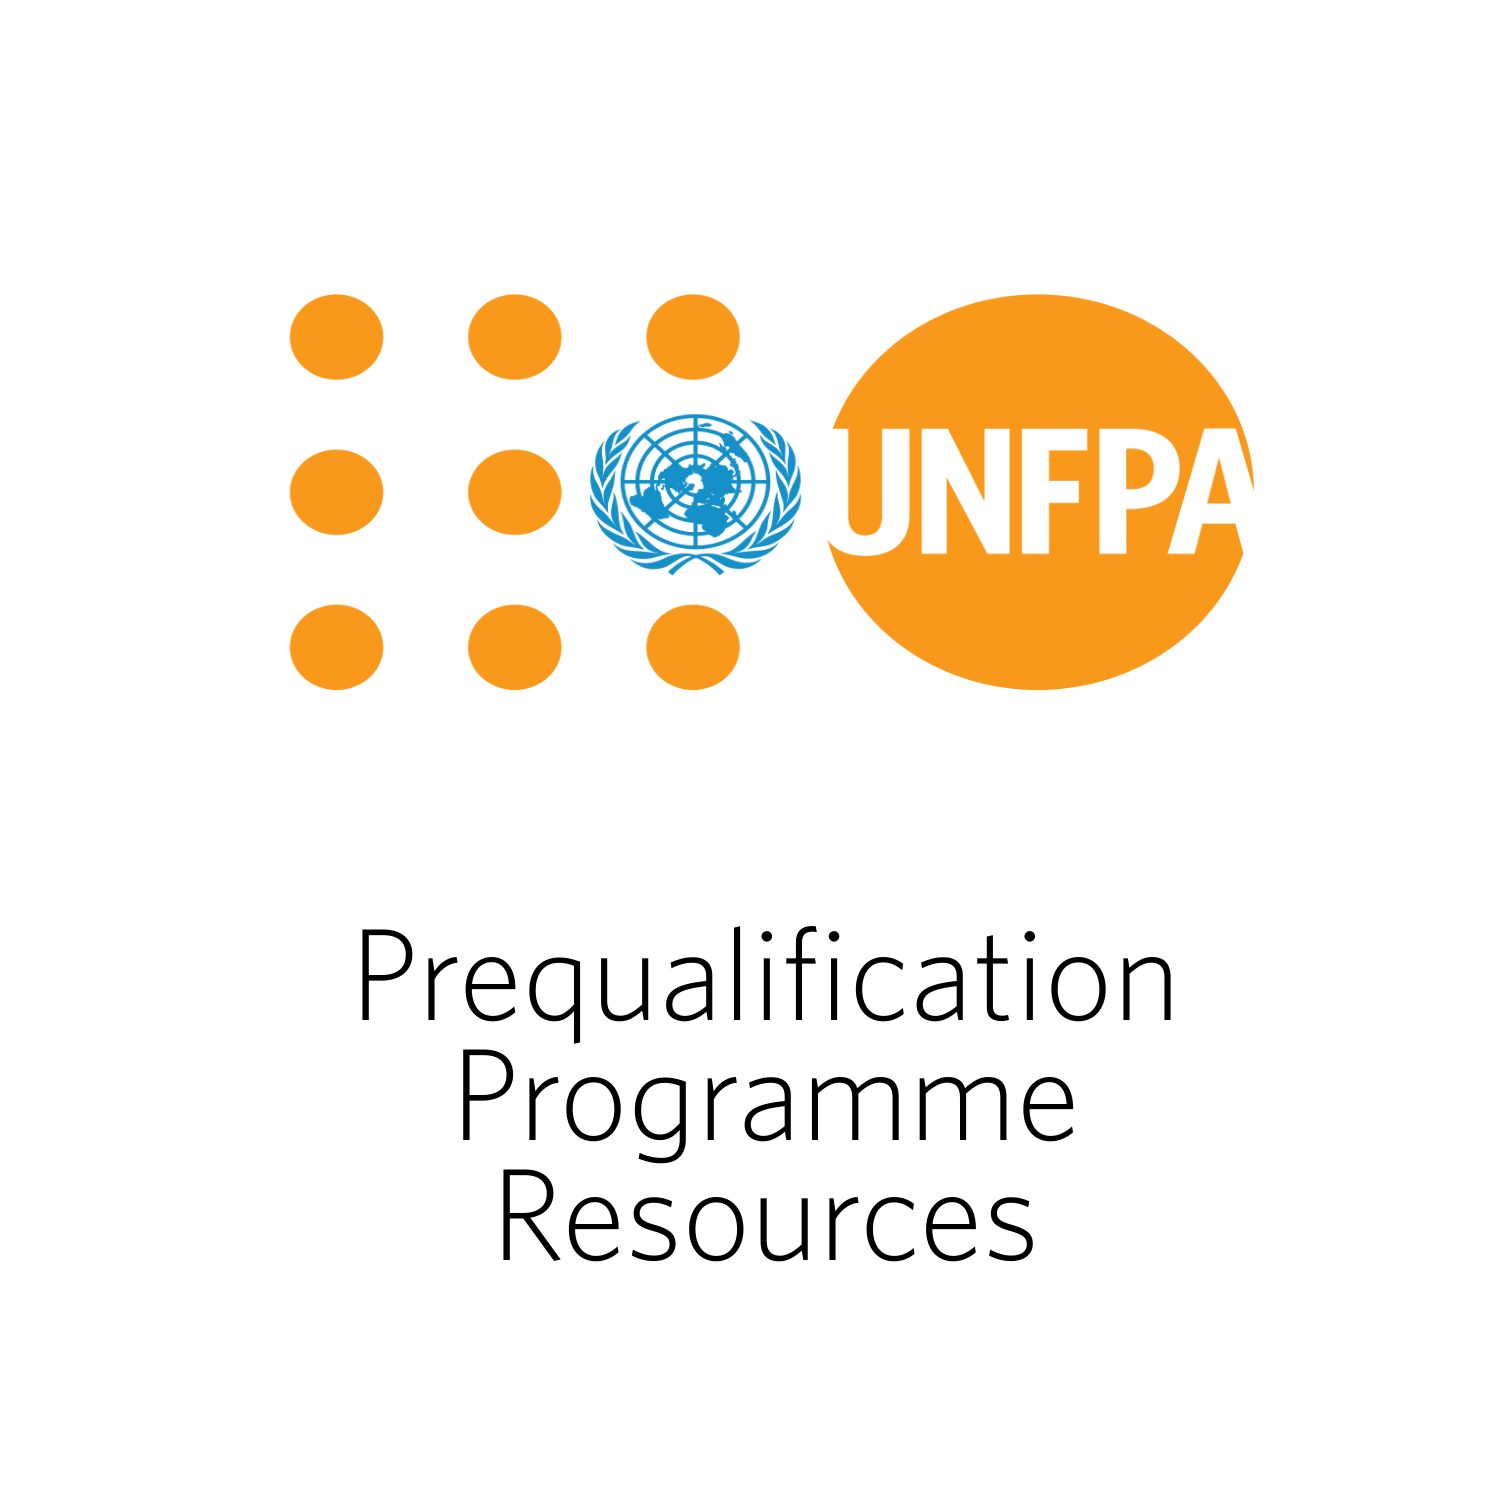 Prequalification Programme Resources